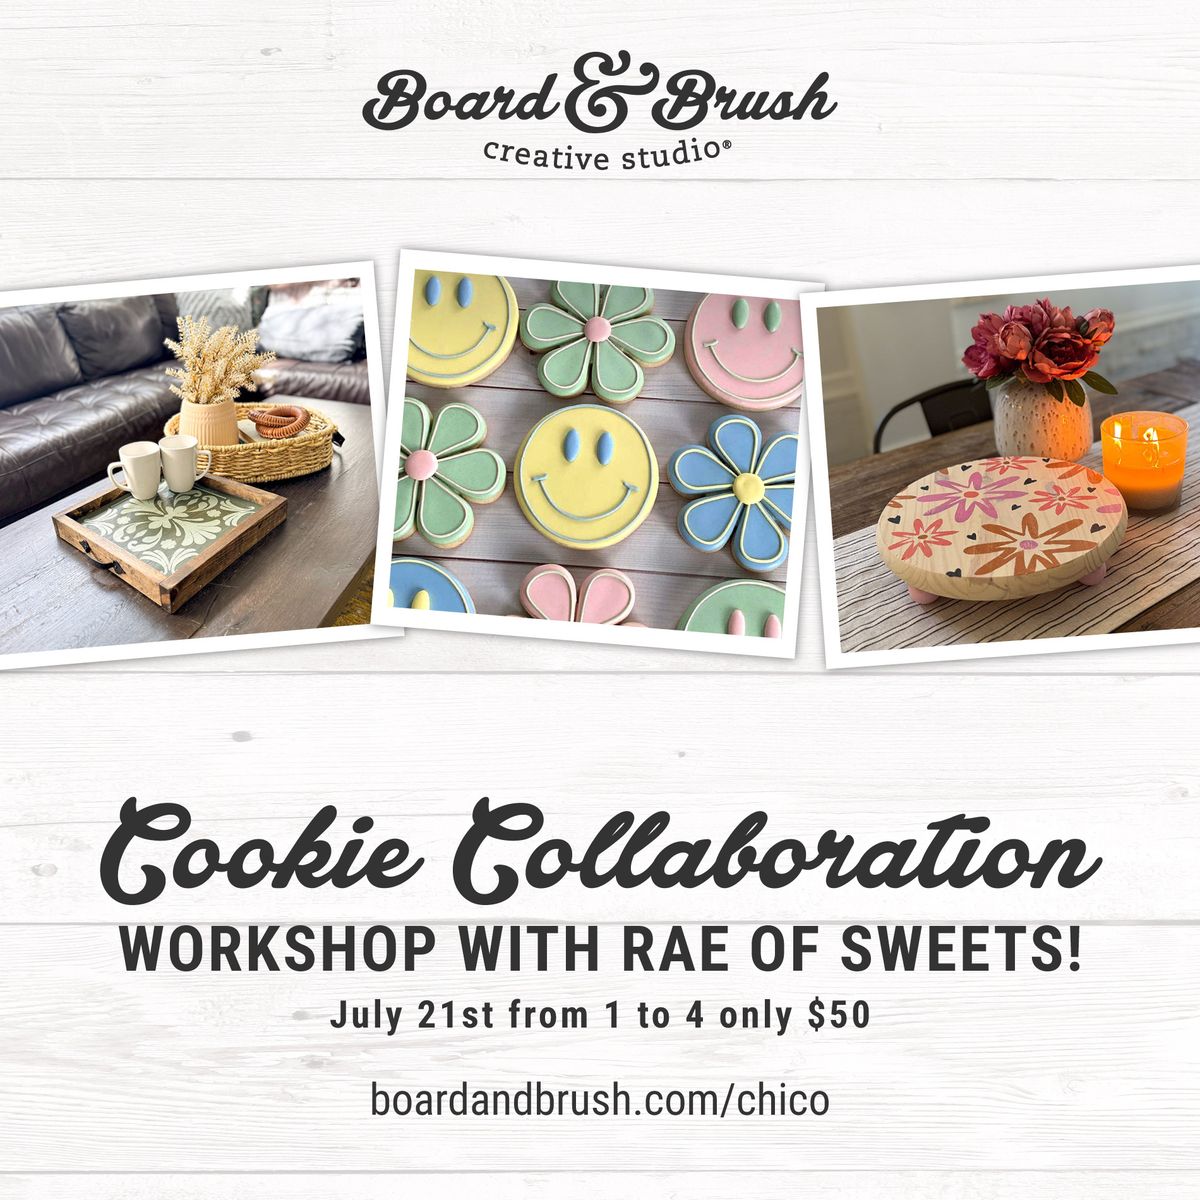 Cookie decorating and DIY wood tray workshop